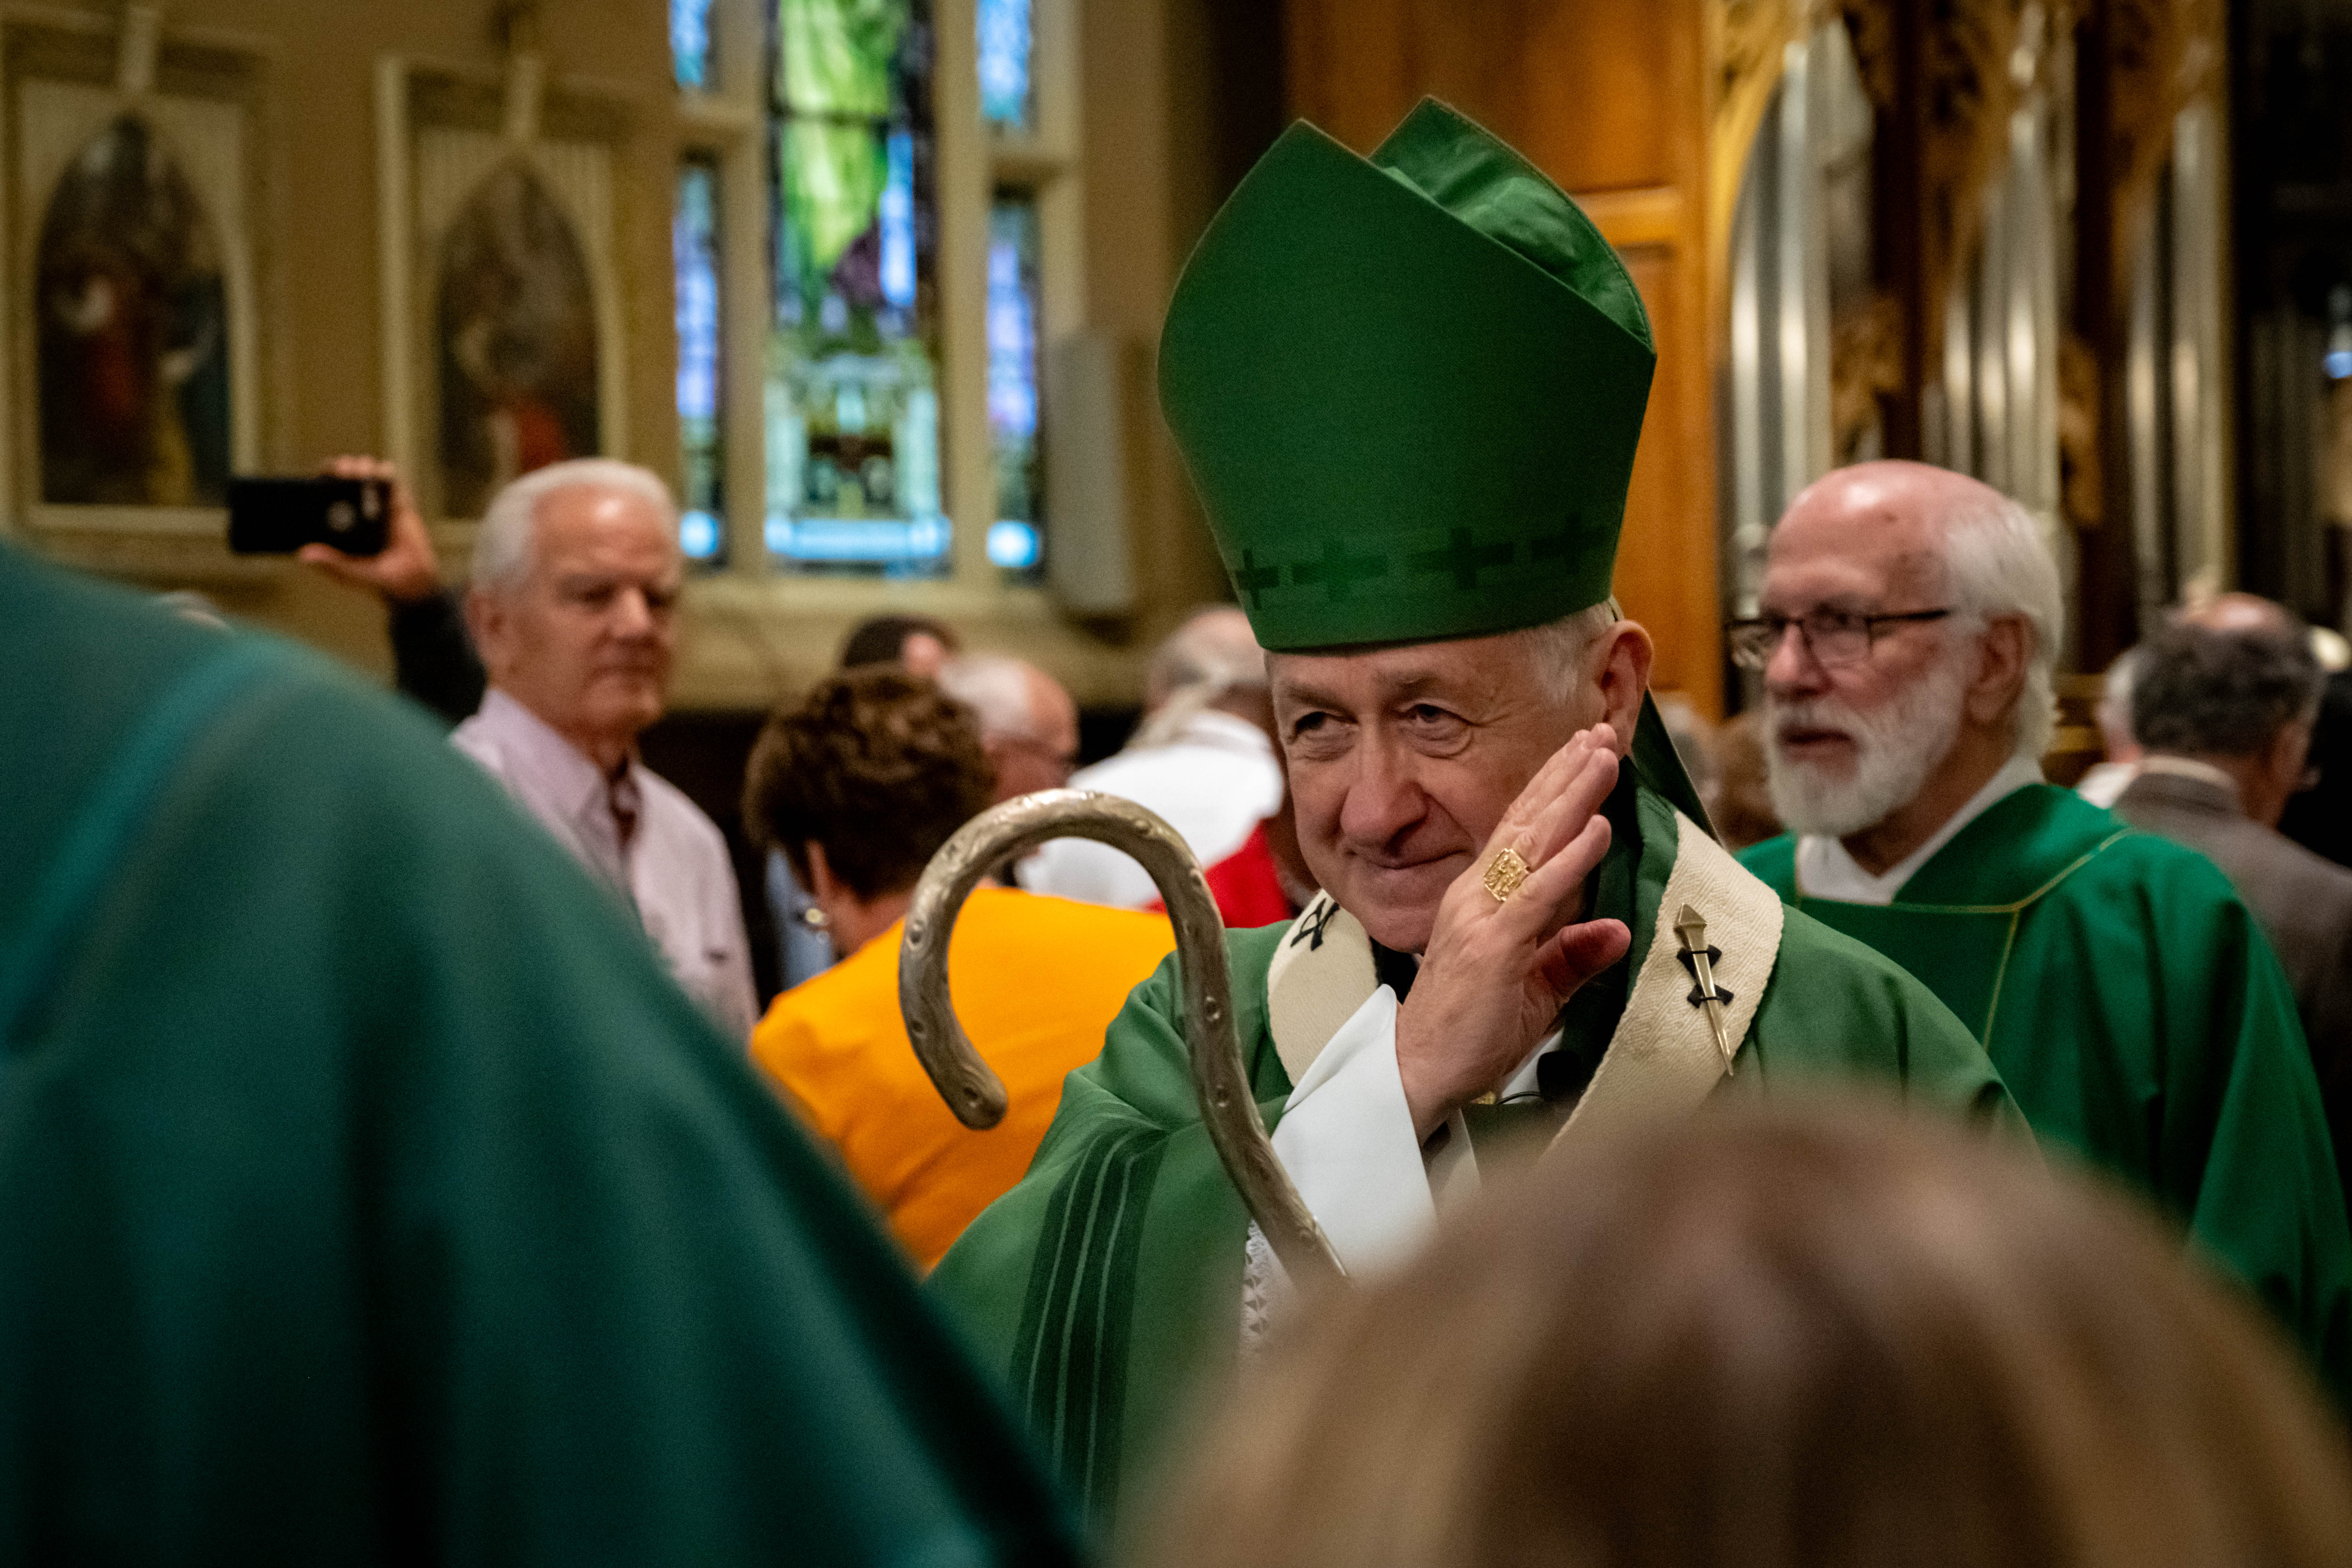 Cardinal Blase Cupich Presides Over LGBTQ+ Mass In Lakeview God Brought Us Together Here As A Community